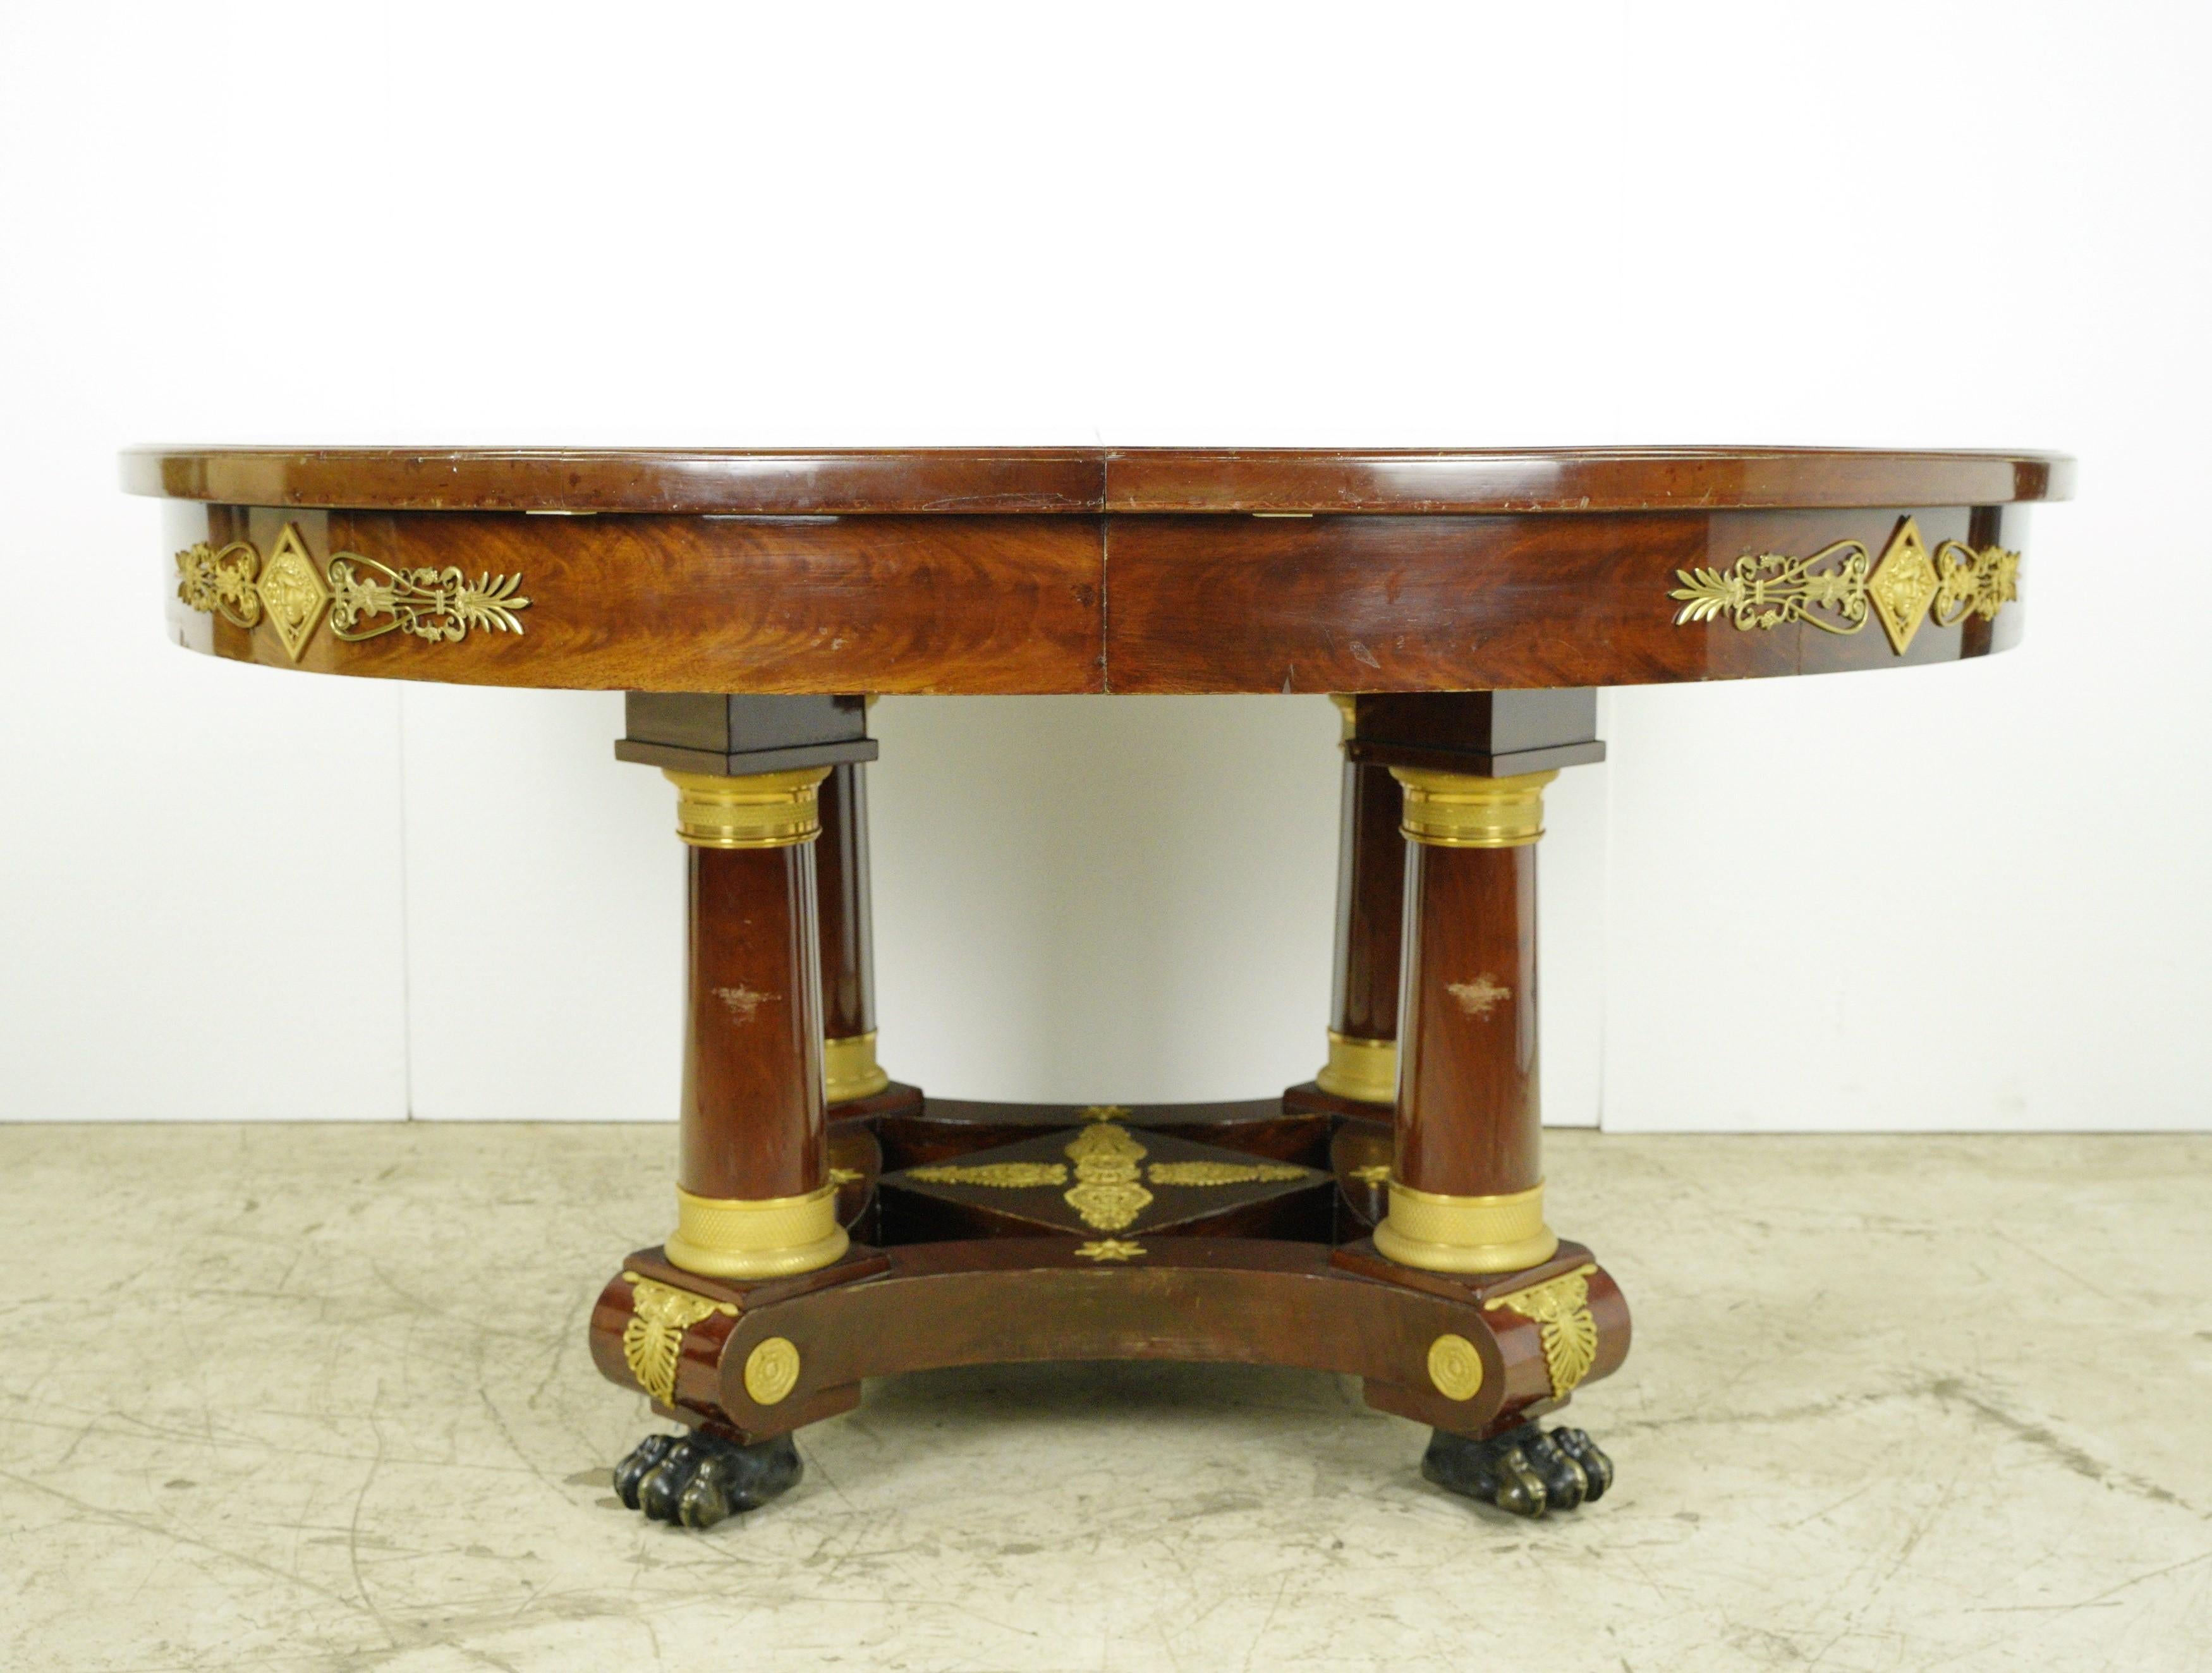 20ième siècle French Empire Mahogany Grand Dining Room Table Set en vente